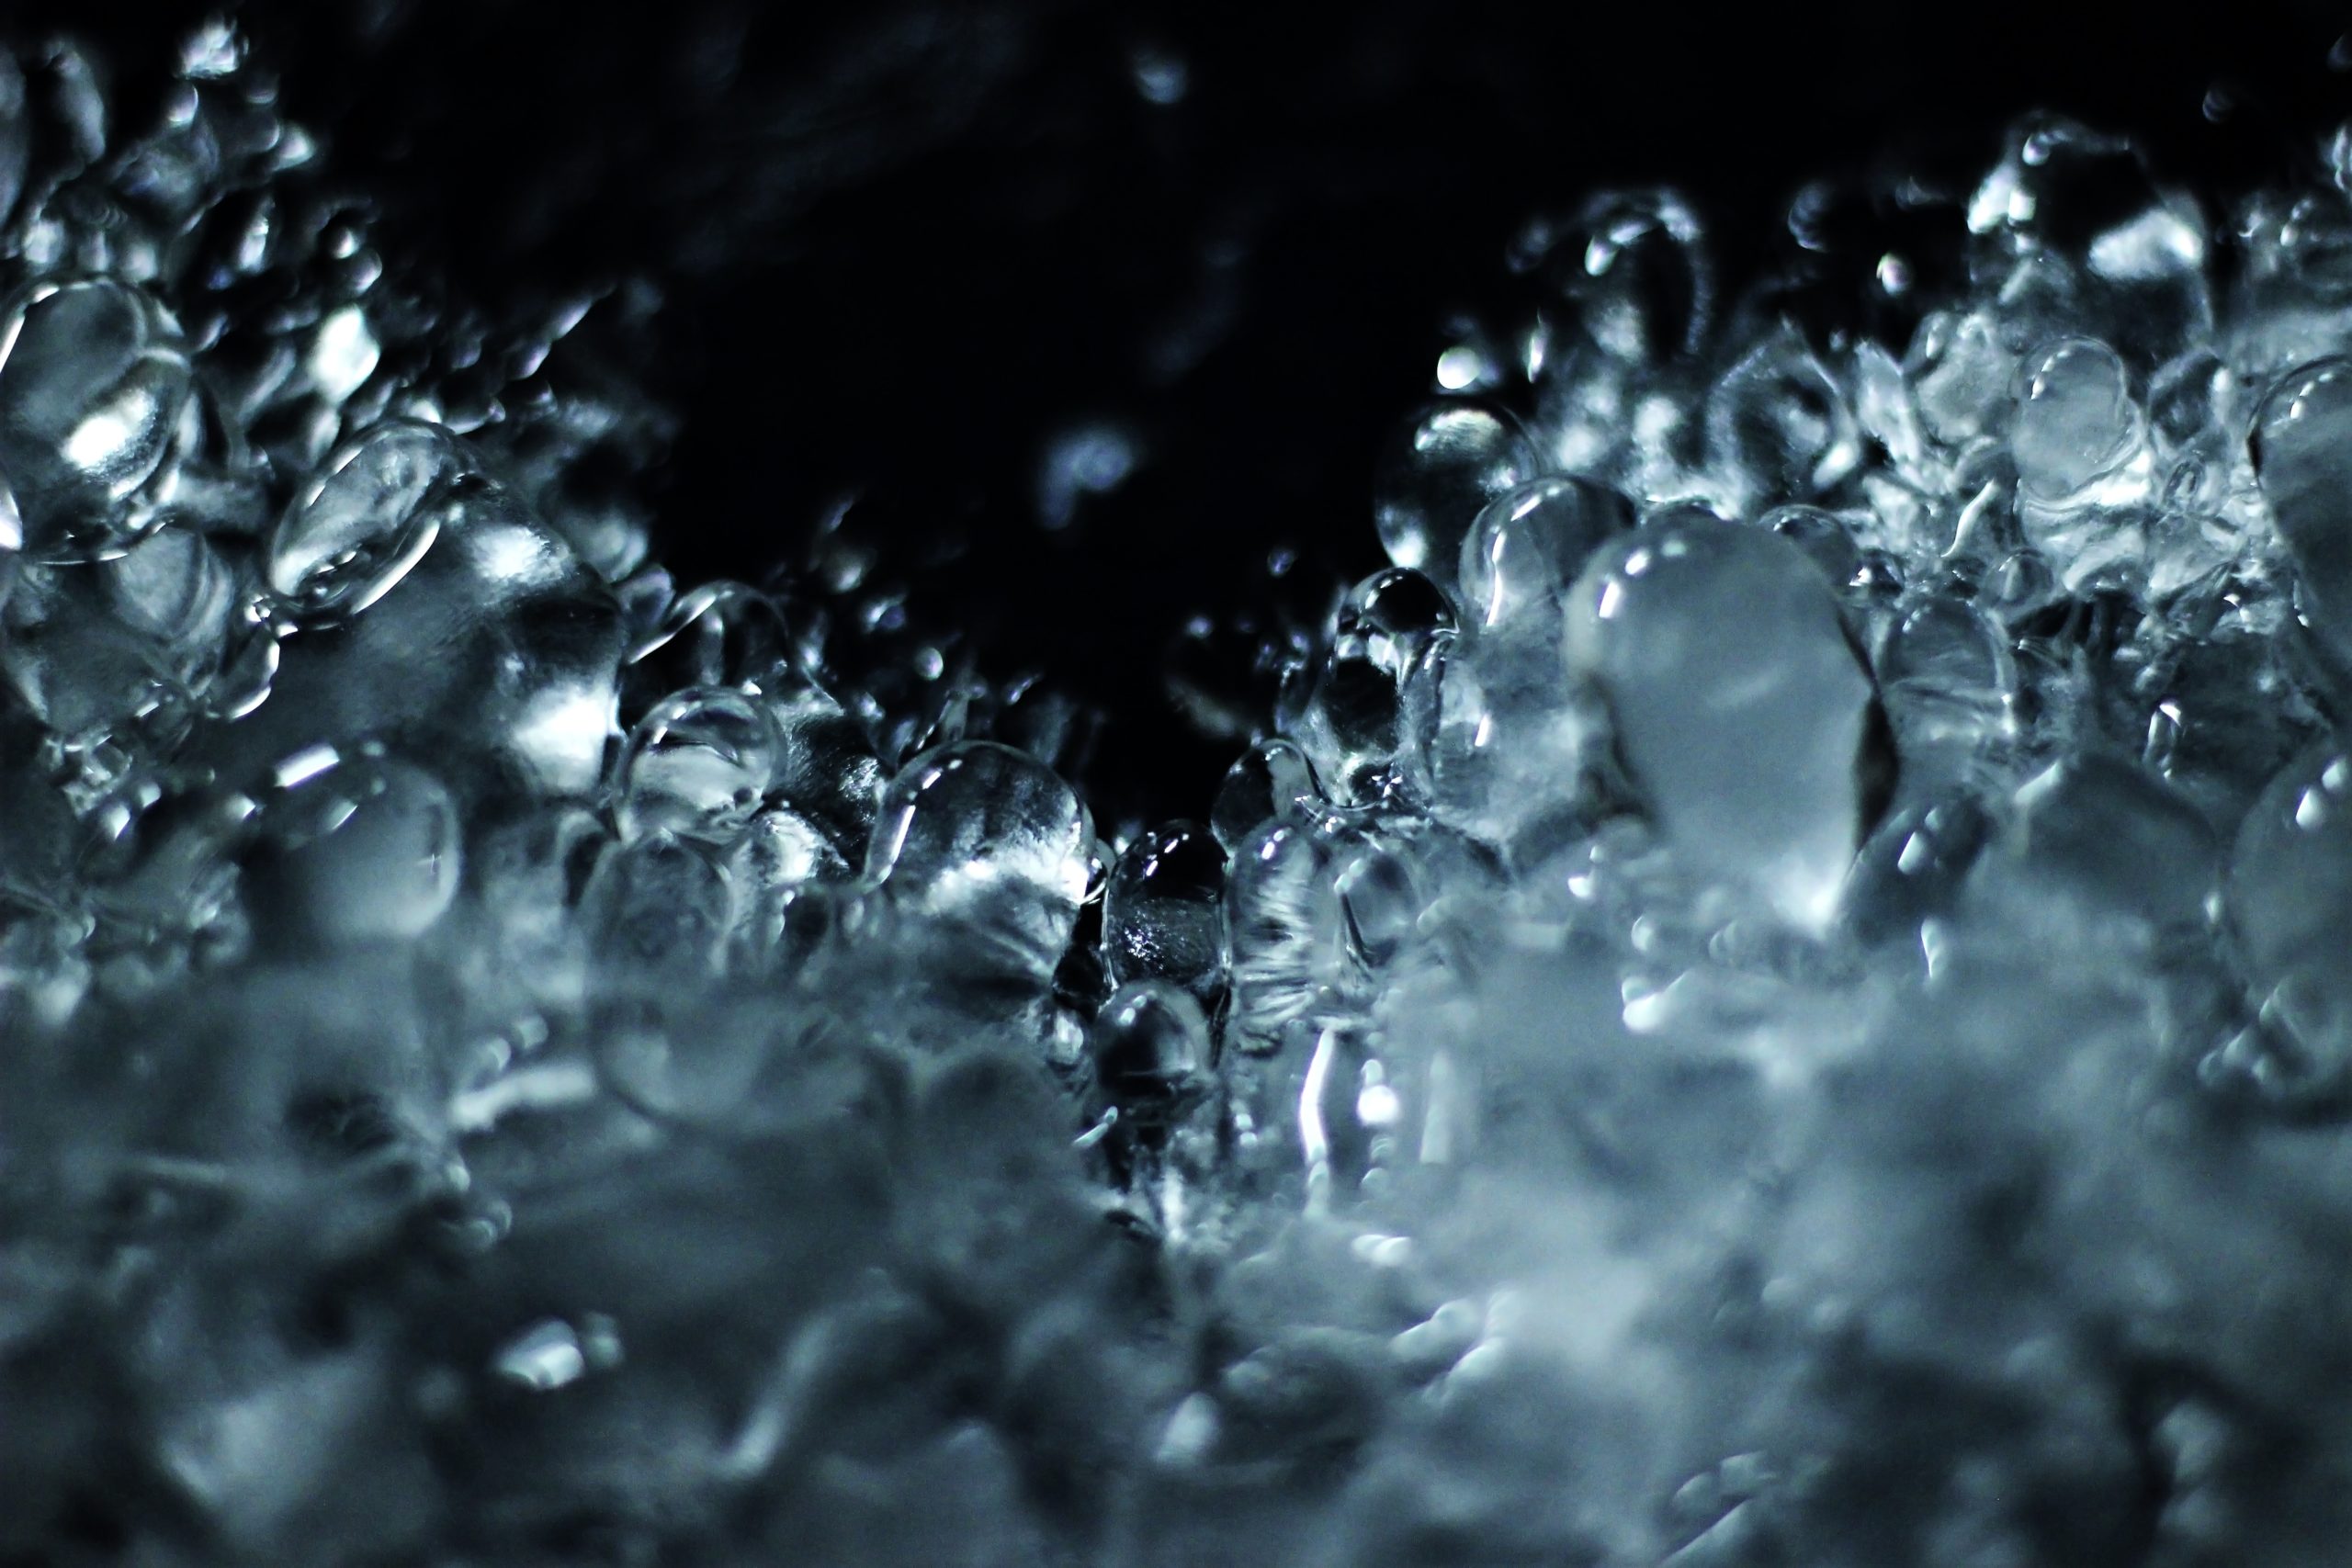 A watery texture is rising up against a black background.